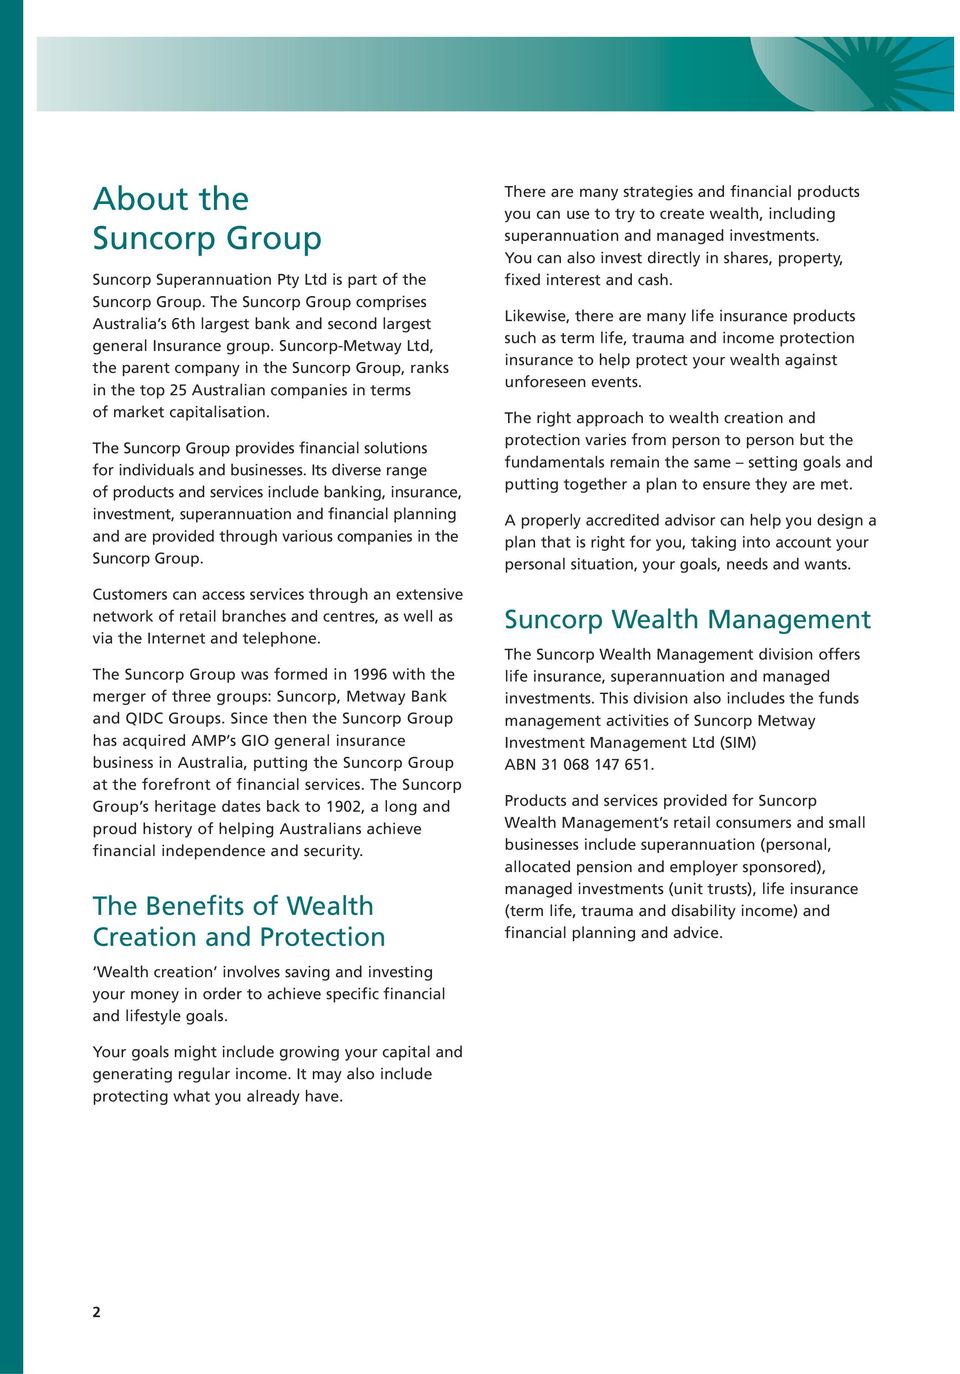 The Suncorp Group provides financial solutions for individuals and businesses.